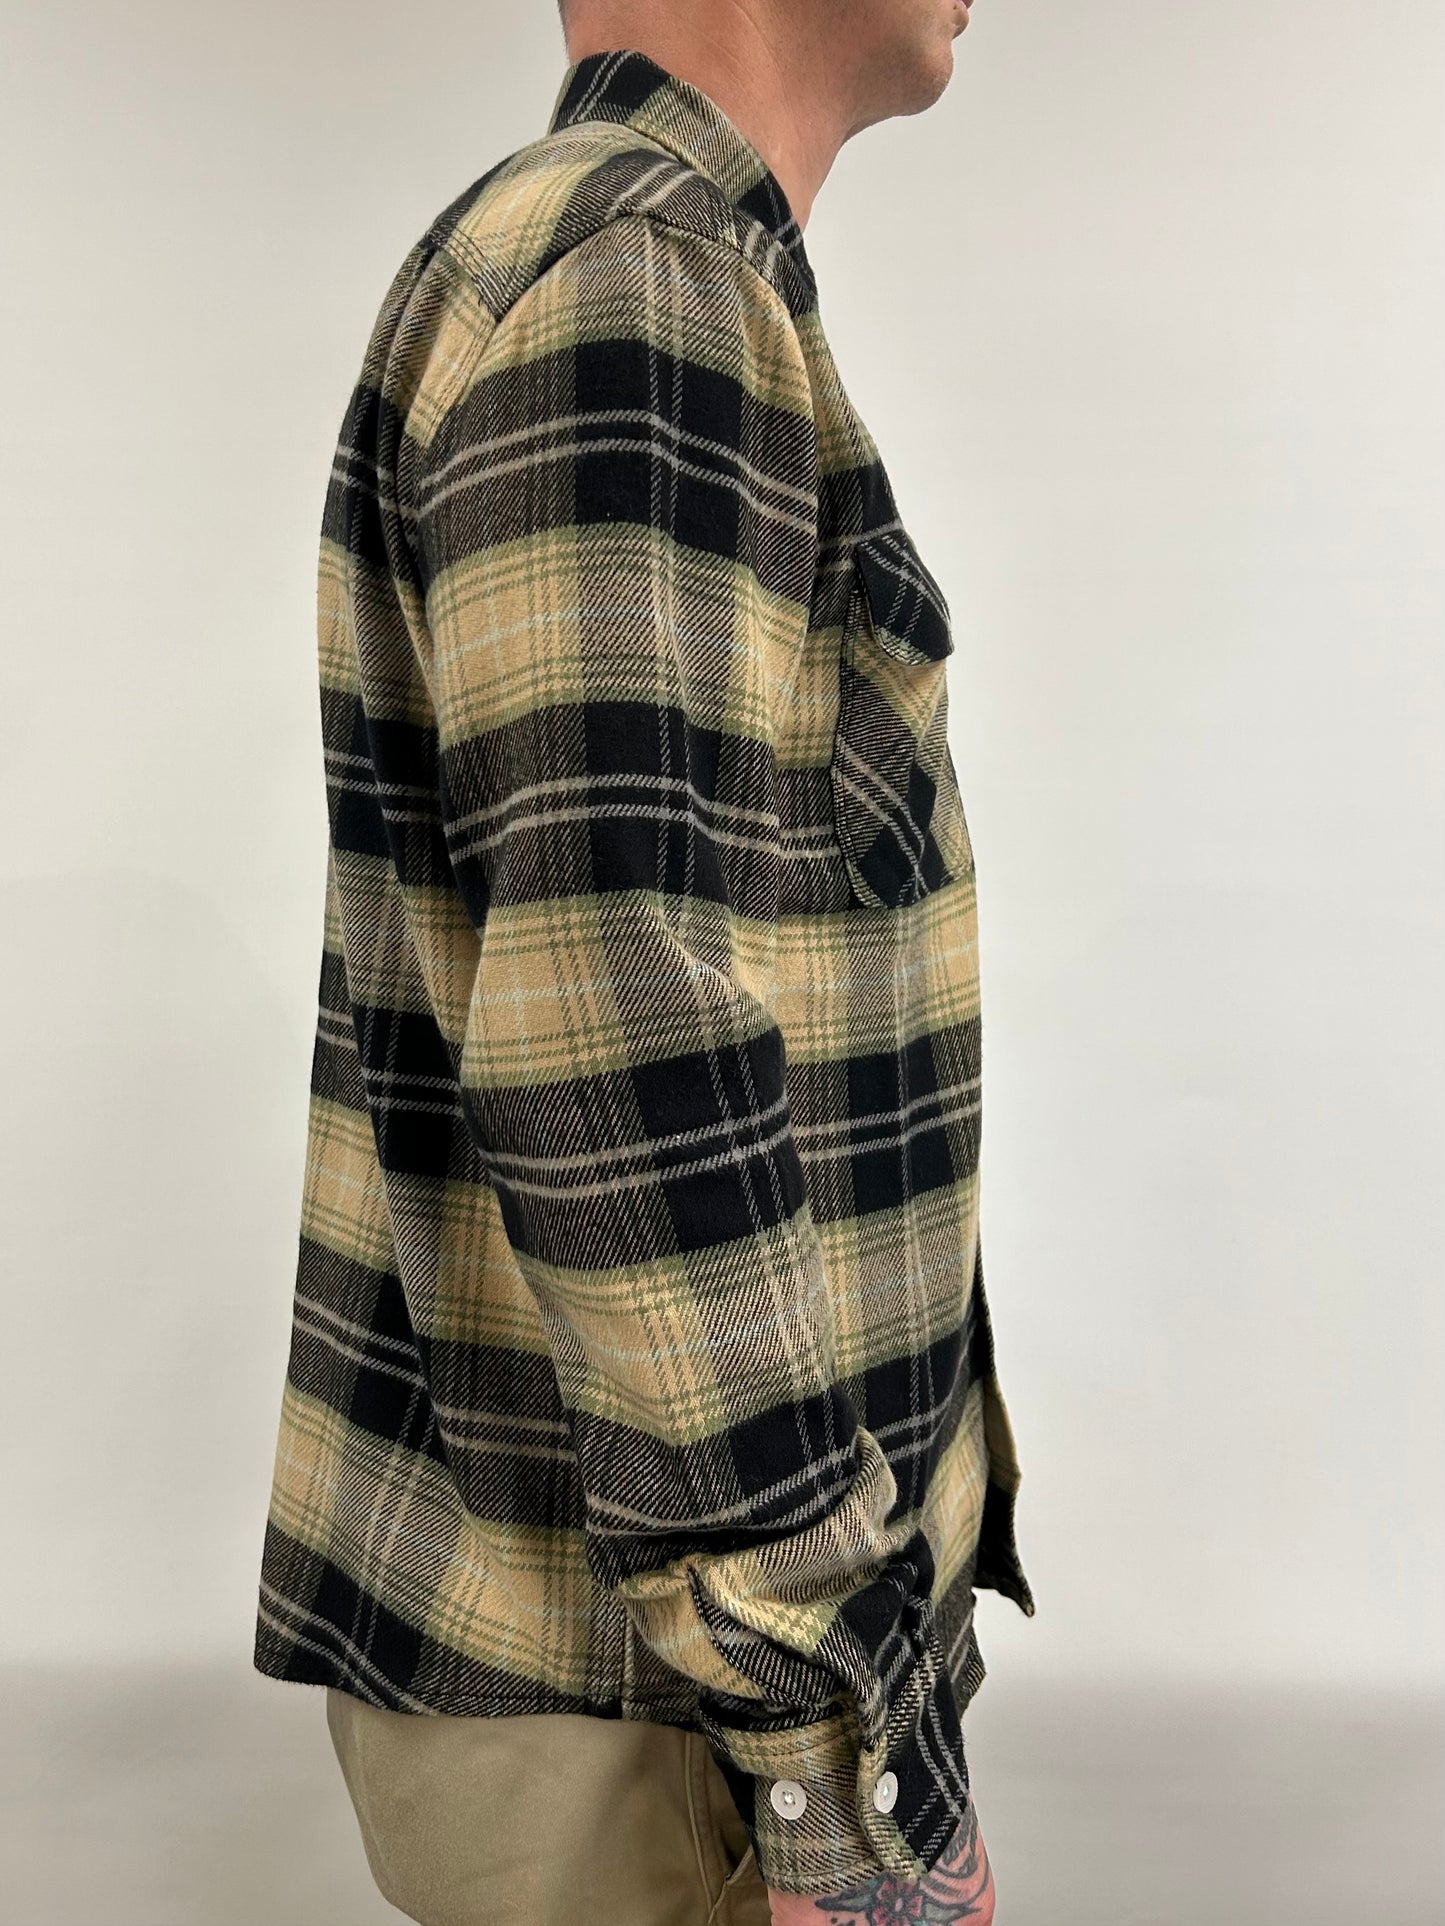 Bowery Flannel - Black/Sand/Olive